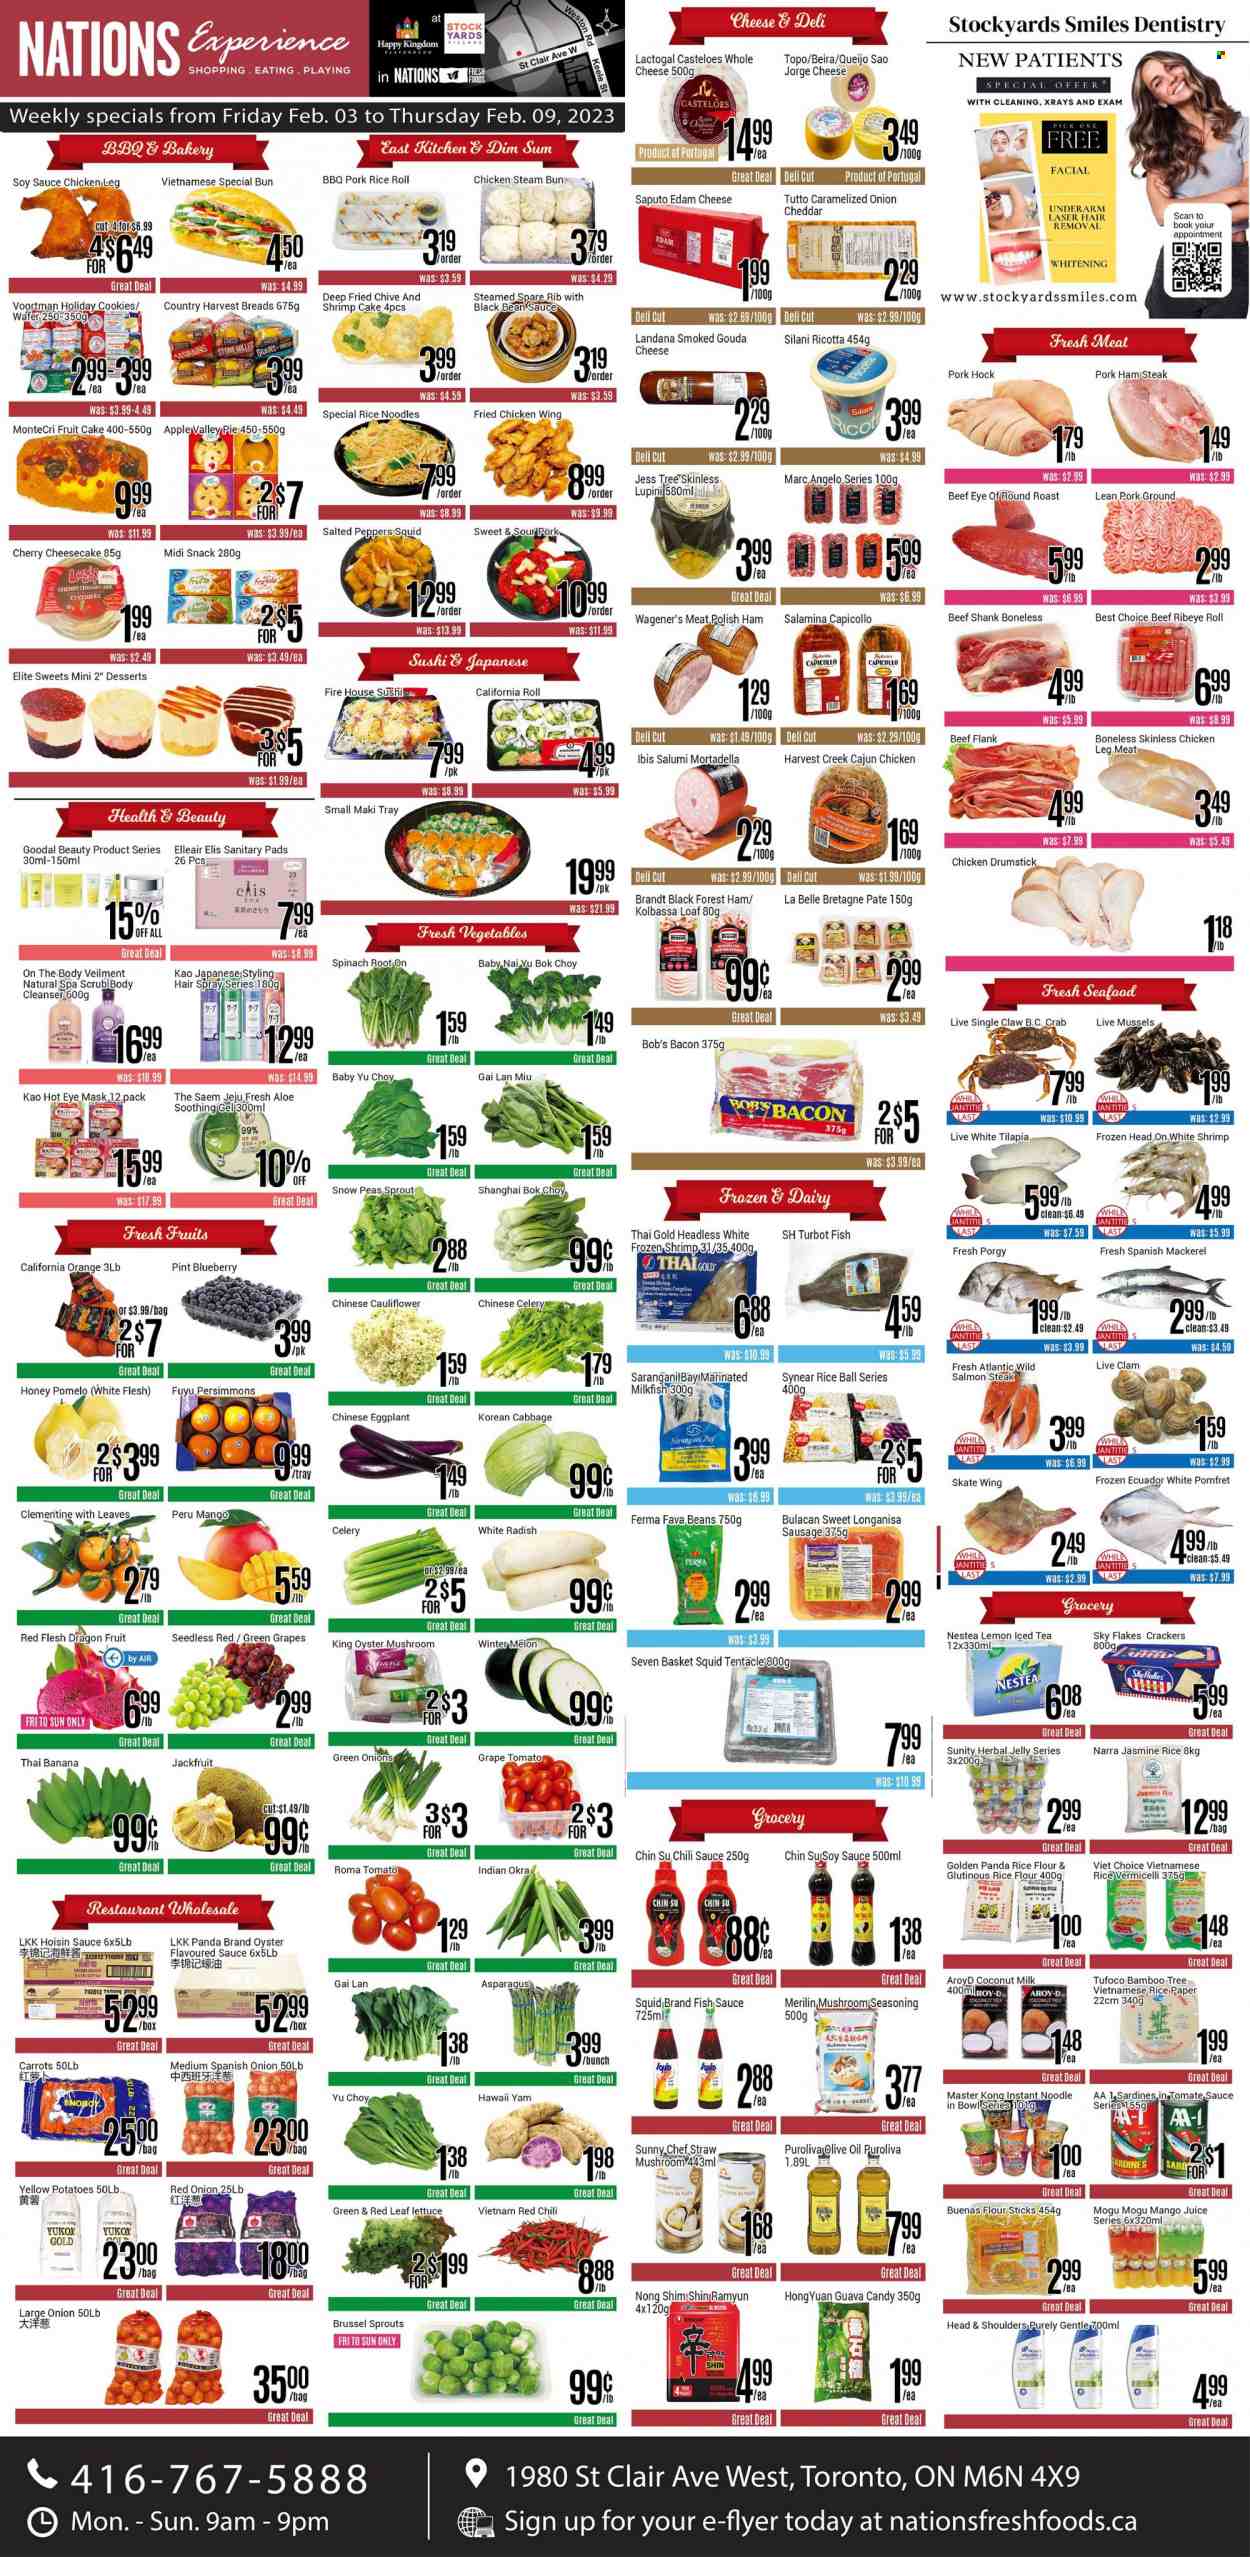 thumbnail - Nations Fresh Foods Flyer - February 03, 2023 - February 09, 2023 - Sales products - oyster mushrooms, cake, pie, cheesecake, asparagus, beans, bok choy, cabbage, carrots, celery, fava beans, radishes, tomatoes, potatoes, peas, okra, lettuce, peppers, eggplant, brussel sprouts, white radish, green onion, guava, mango, persimmons, oranges, melons, pomelo, dragon fruit, clams, mackerel, mussels, salmon, sardines, squid, tilapia, oysters, turbot, seafood, crab, fish, shrimps, milkfish, sauce, fried chicken, noodles, bacon, mortadella, ham, sausage, ham steaks, edam cheese, gouda, cheddar, snow peas, Country Harvest, cookies, wafers, snack, jelly, crackers, flour, rice flour, coconut milk, jasmine rice, rice vermicelli, spice, fish sauce, soy sauce, hoisin sauce, chilli sauce, olive oil, oil, honey, juice, ice tea, chicken legs, beef meat, beef shank, eye of round, round roast, pork hock, pork meat, cleanser, Head & Shoulders, polish, ricotta, steak. Page 1.